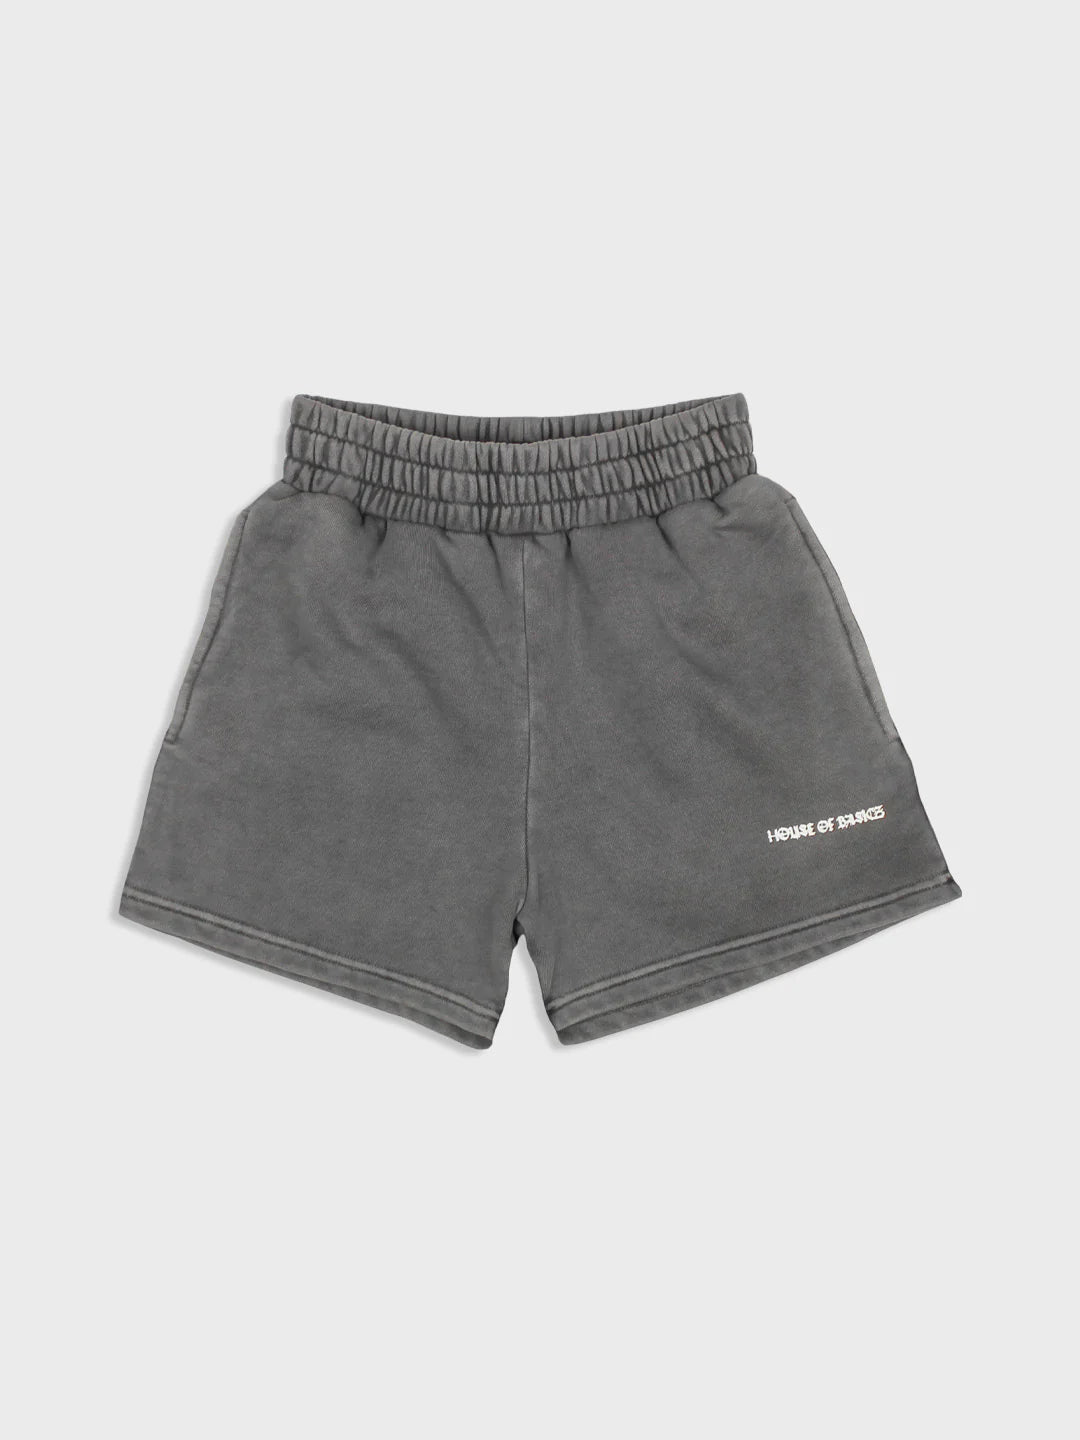 HOUSE OF BASICZ - THE GRAY VINTAGE SHORT